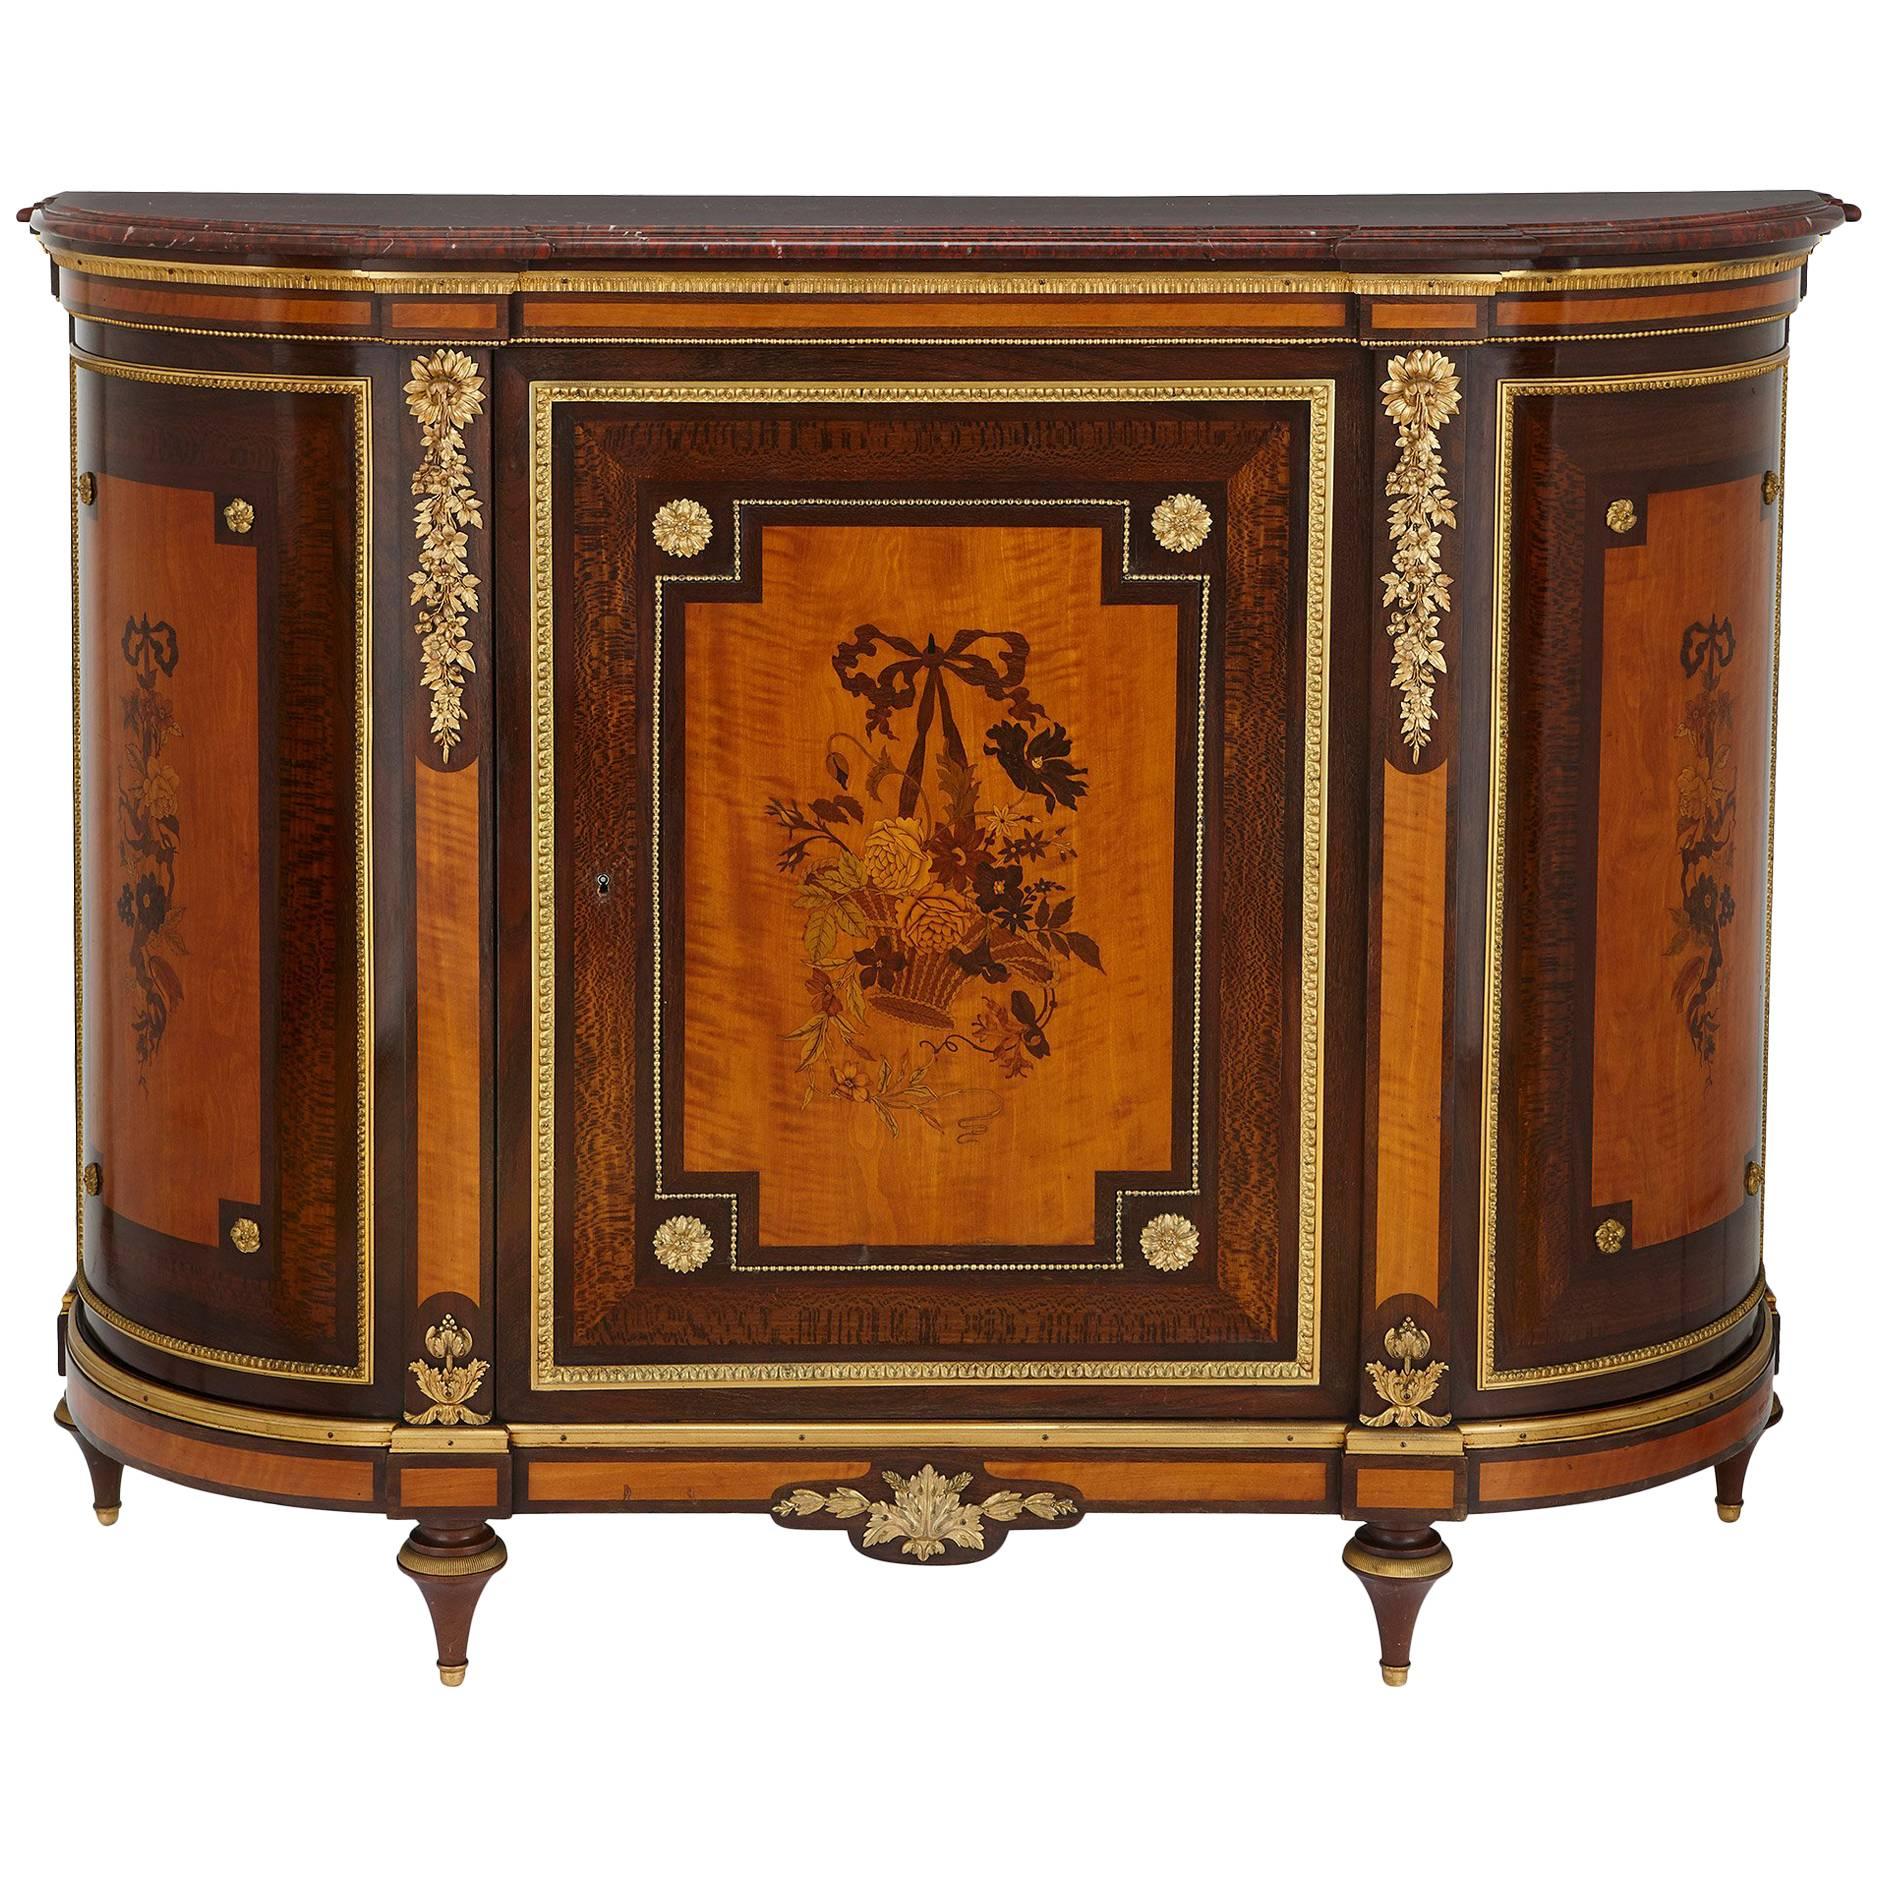 French Gilt Bronze, Marble and Marquetry Cabinet by Gros